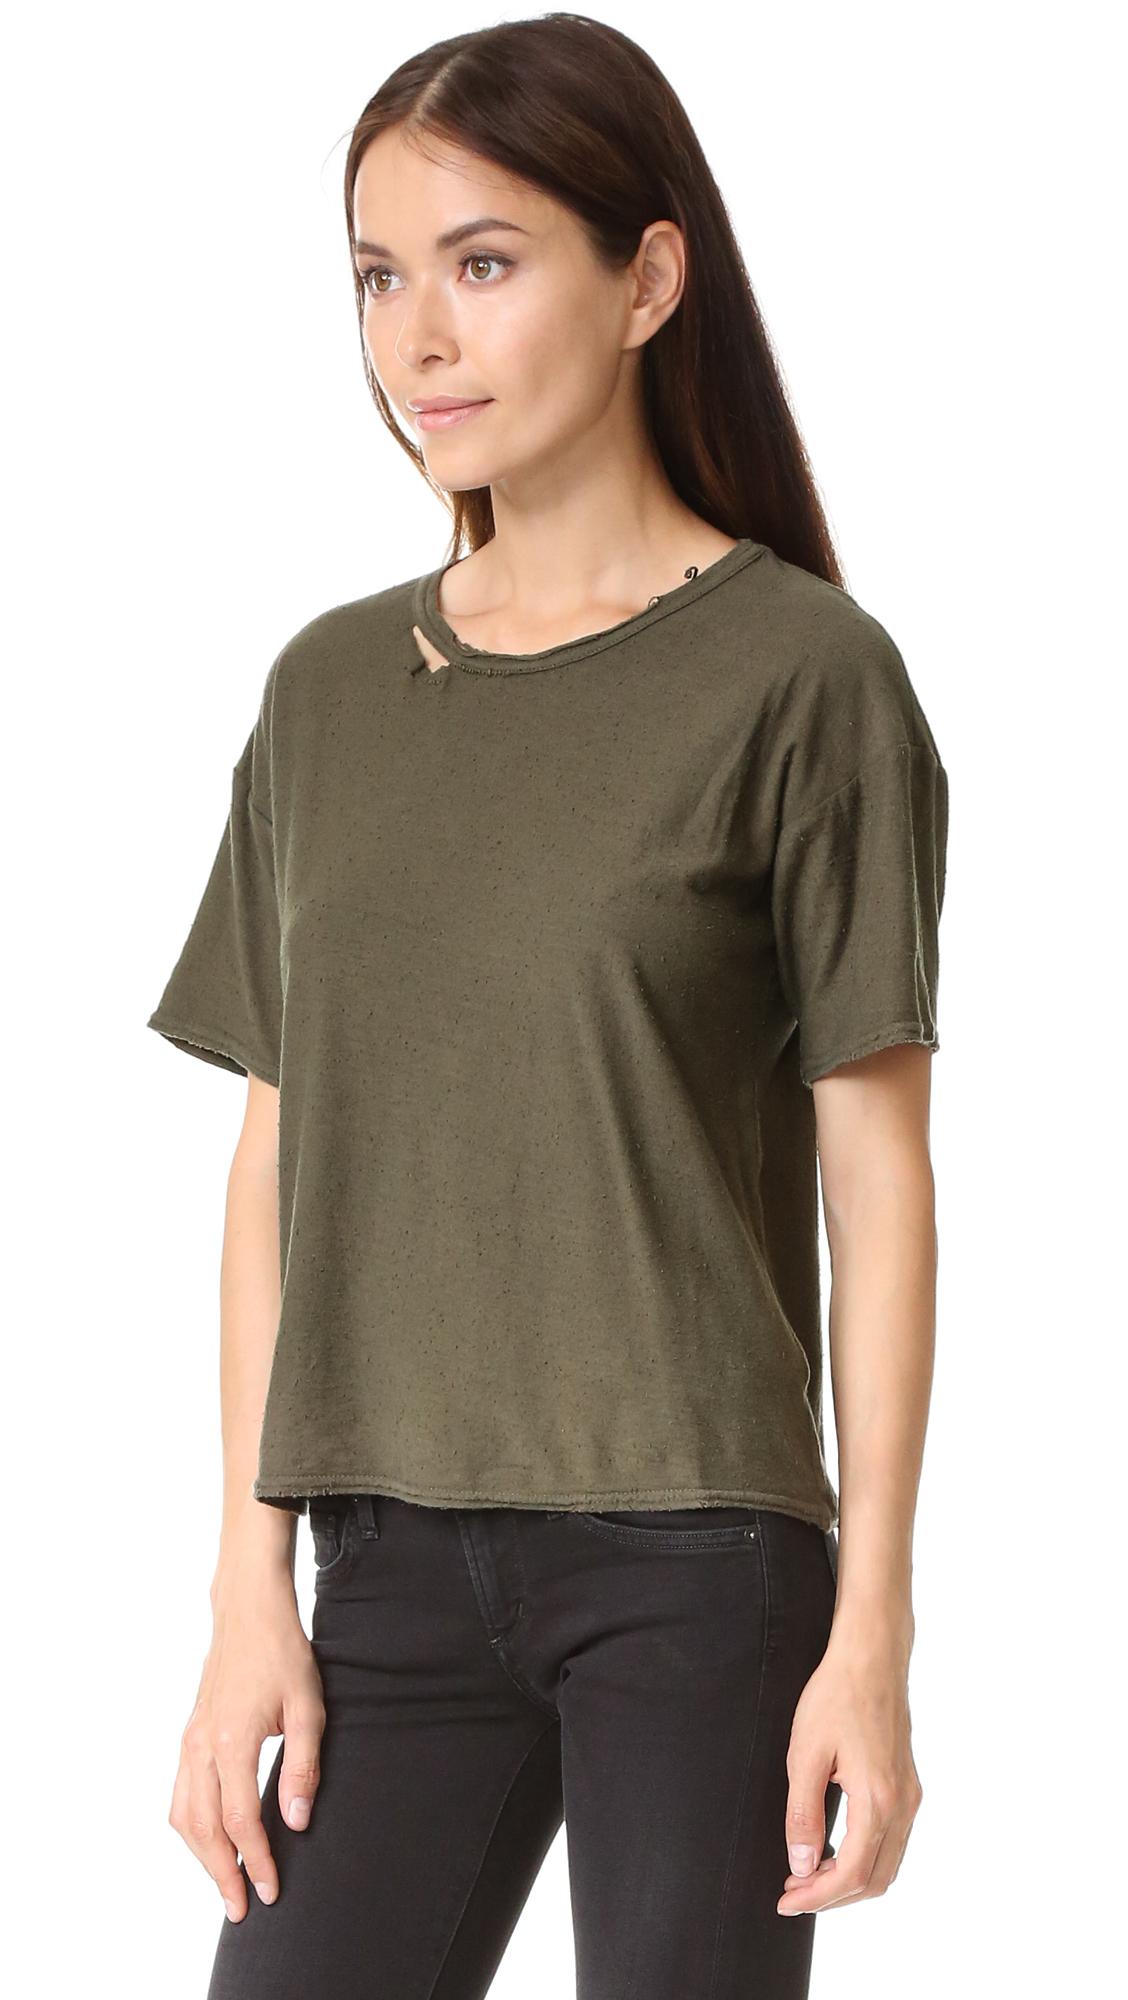 Lyst - Citizens Of Humanity Premium Vintage Esmay T-shirt in Green